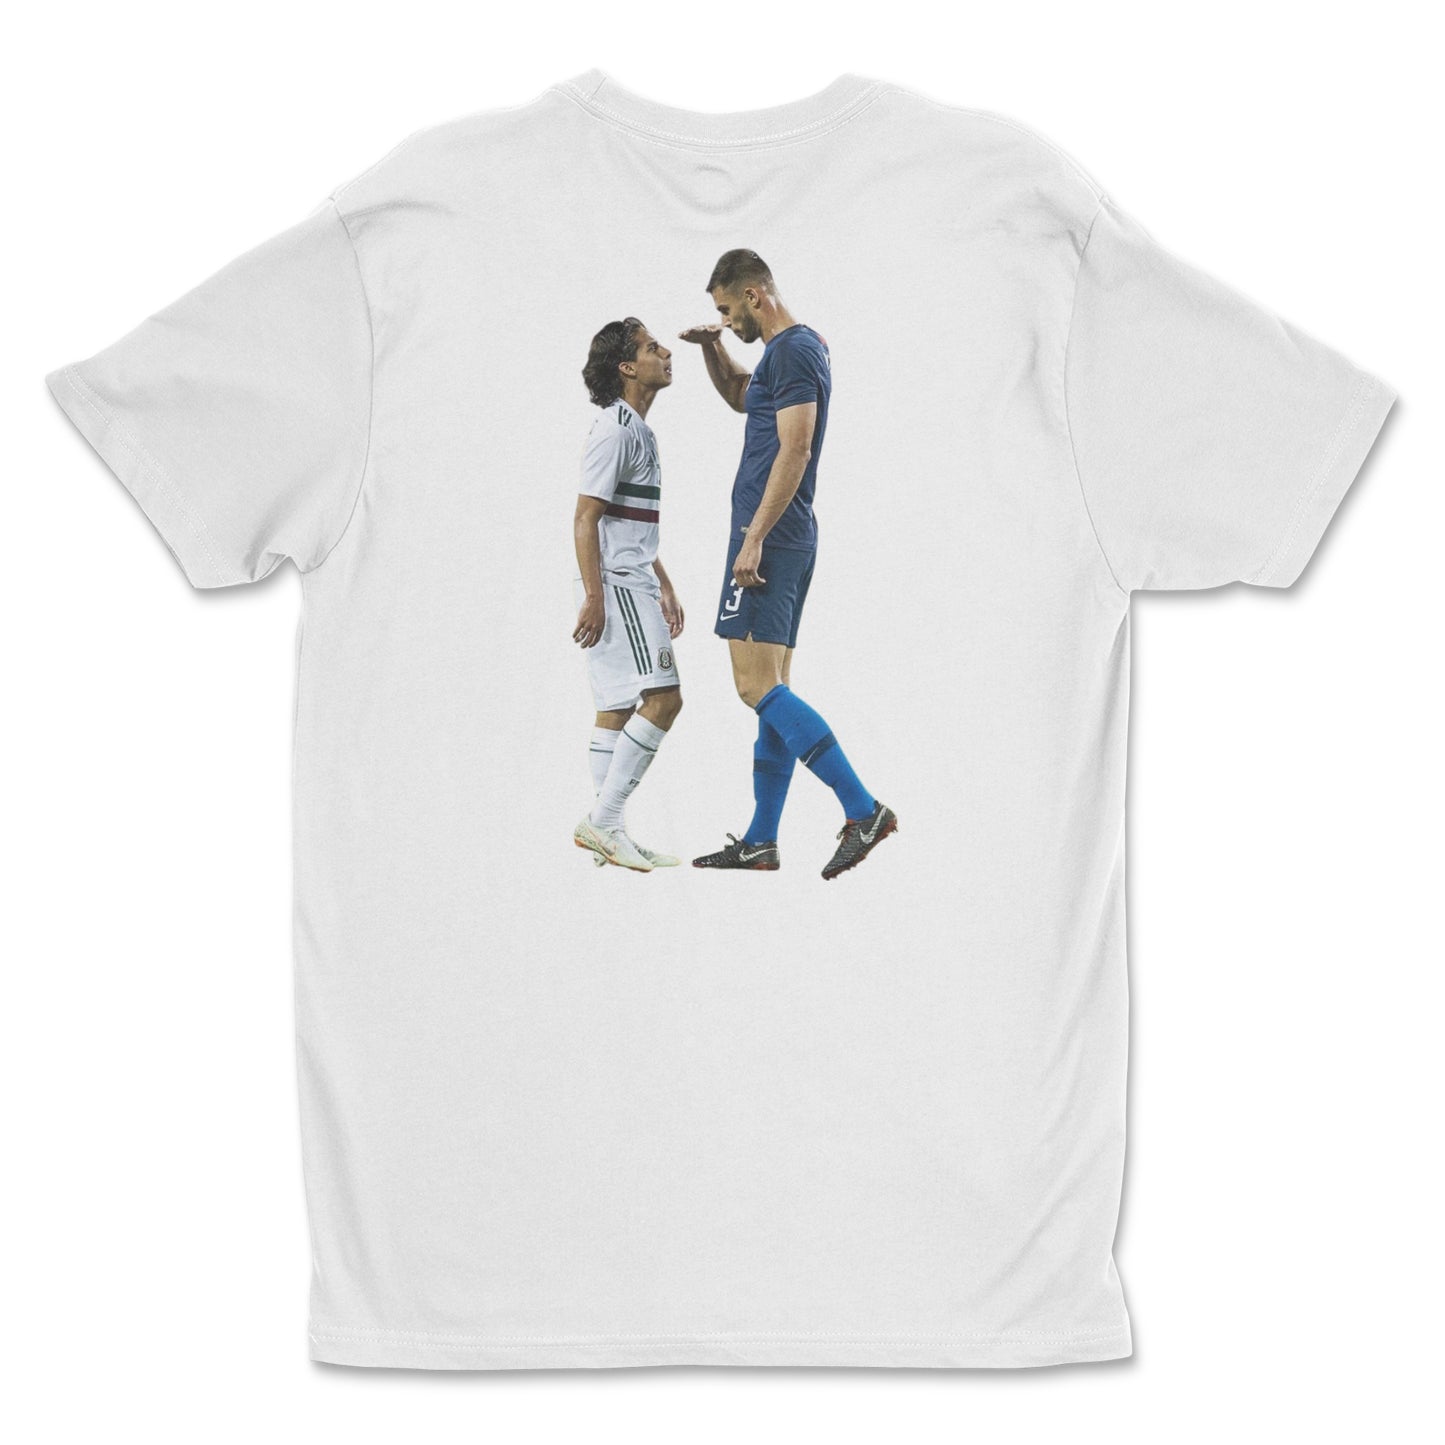 white t-shirt with miazga lainez picture - the height of rivalry